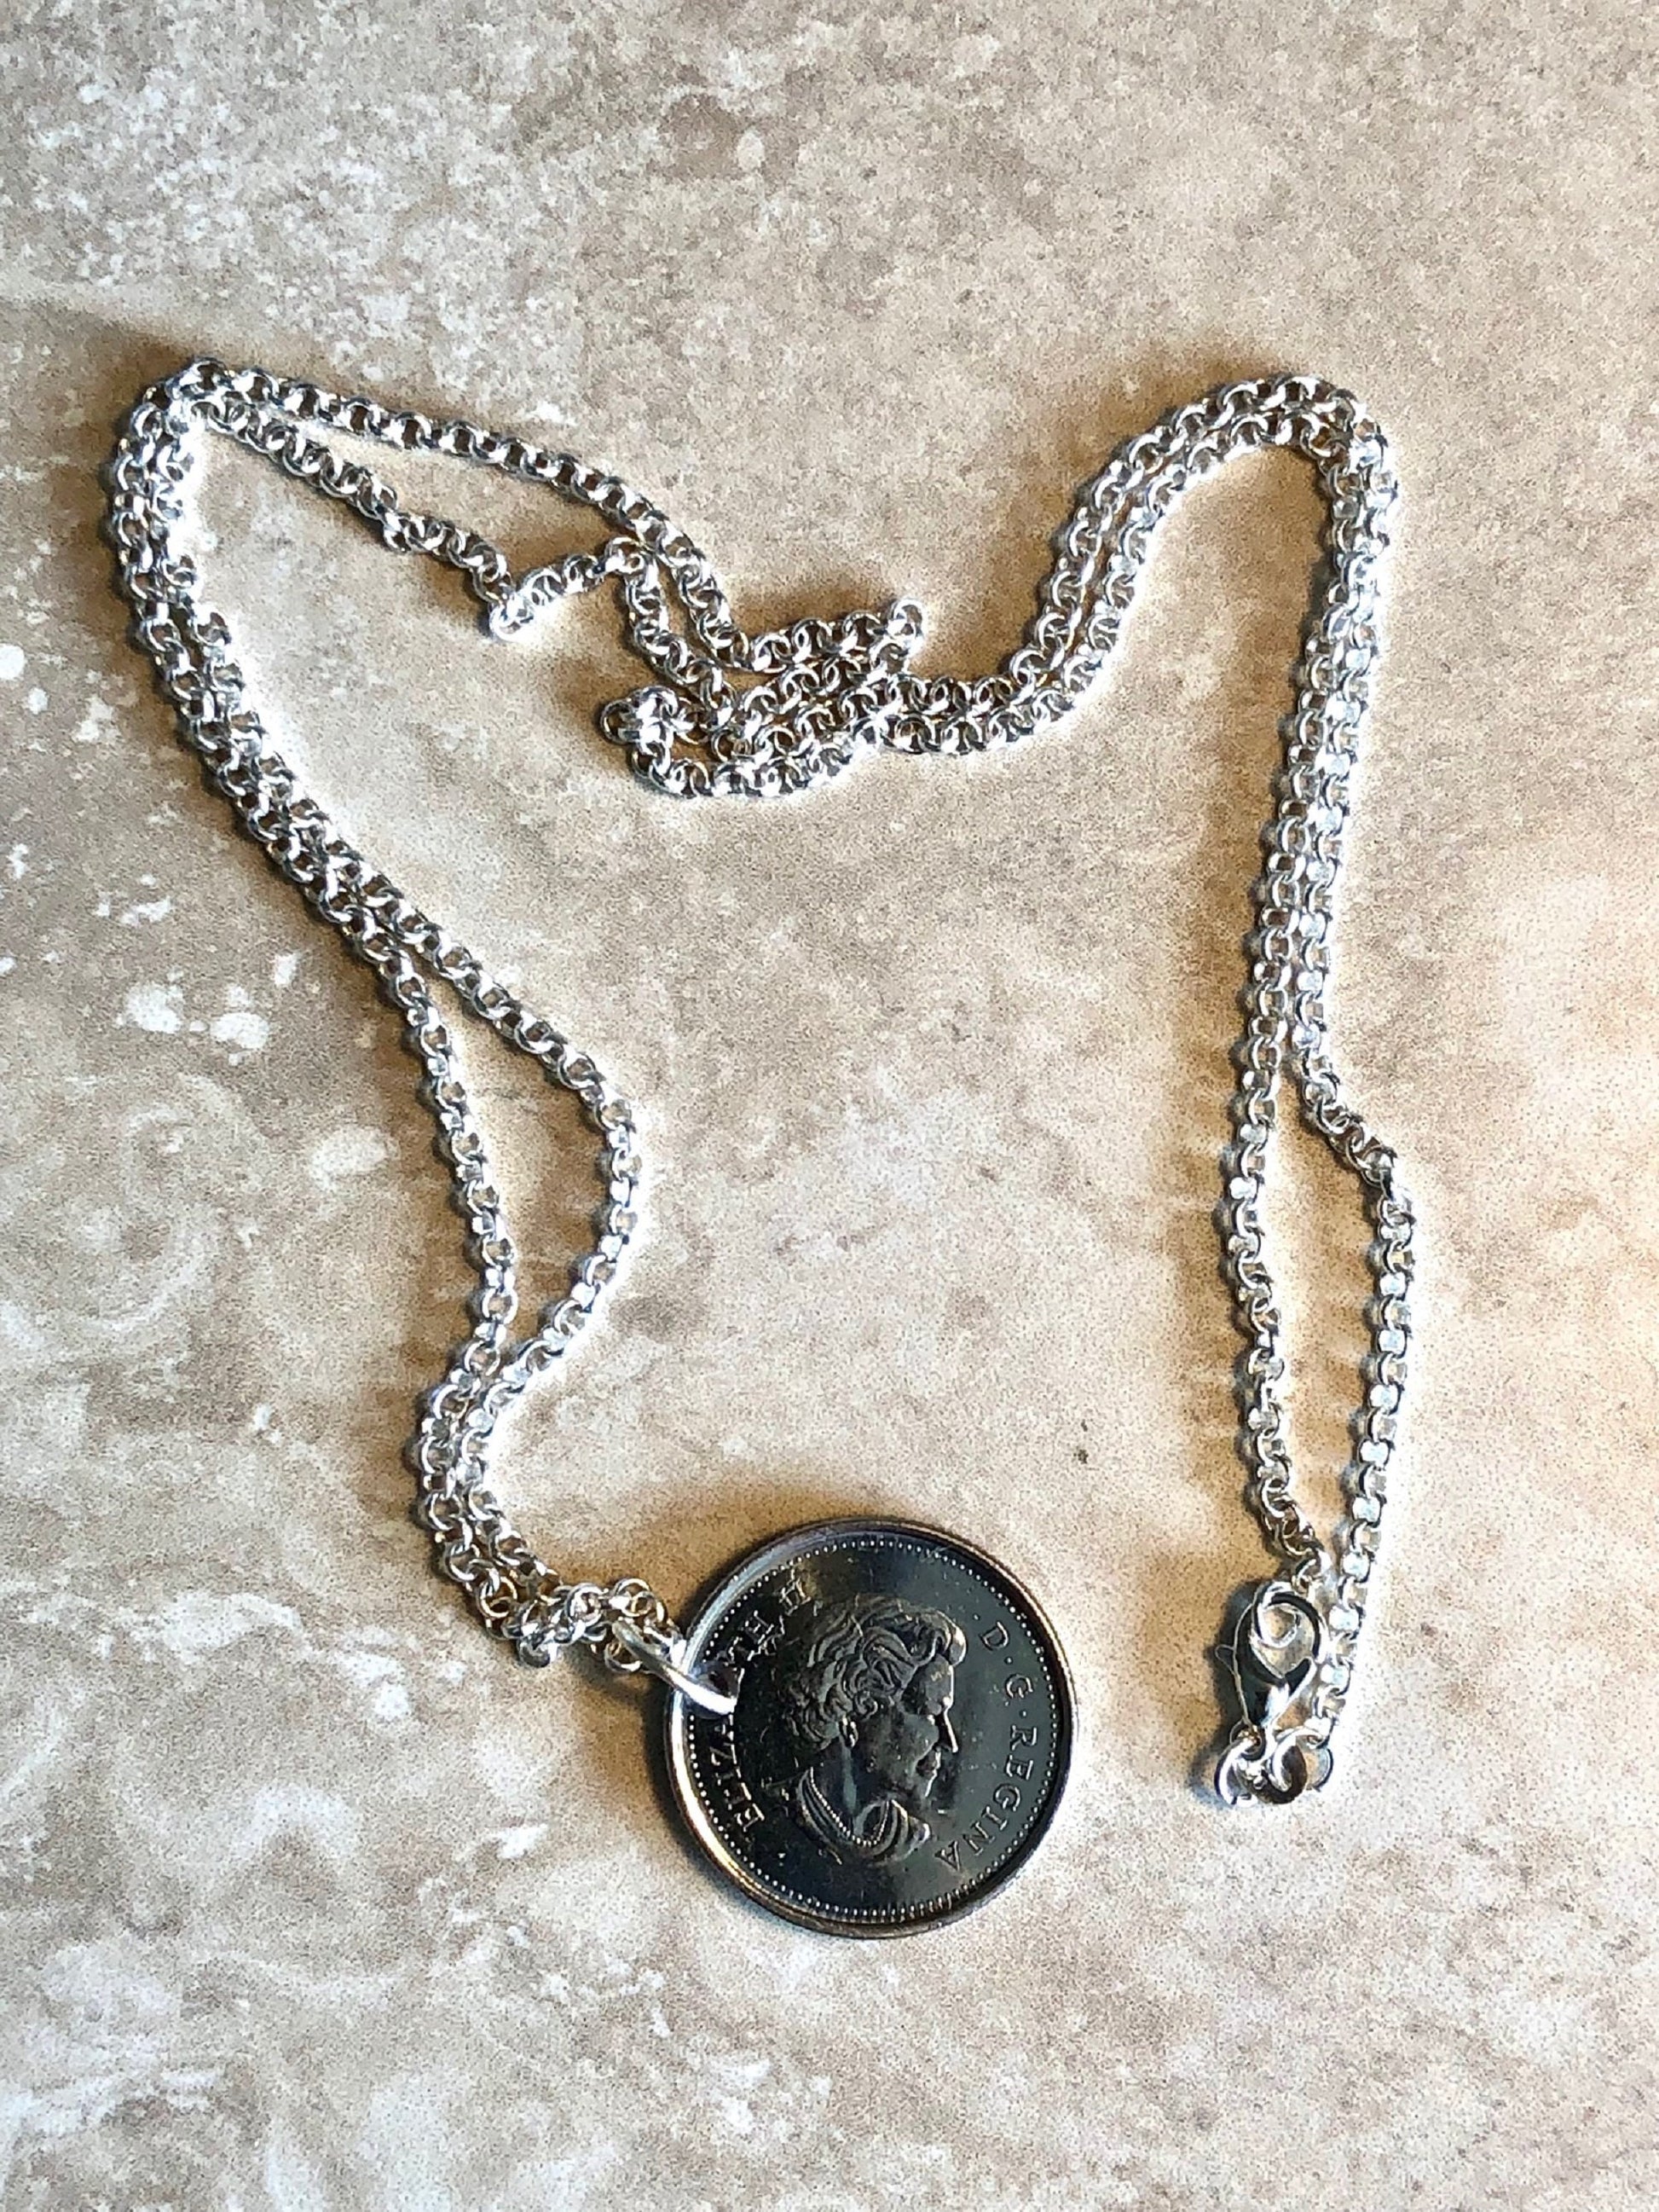 Canadian Quarter Coin Necklace Pendant Canada 2015 25 Cents Flag 50th Anniversary Custom Made Vintage and Rare coins - Coin Enthusiast